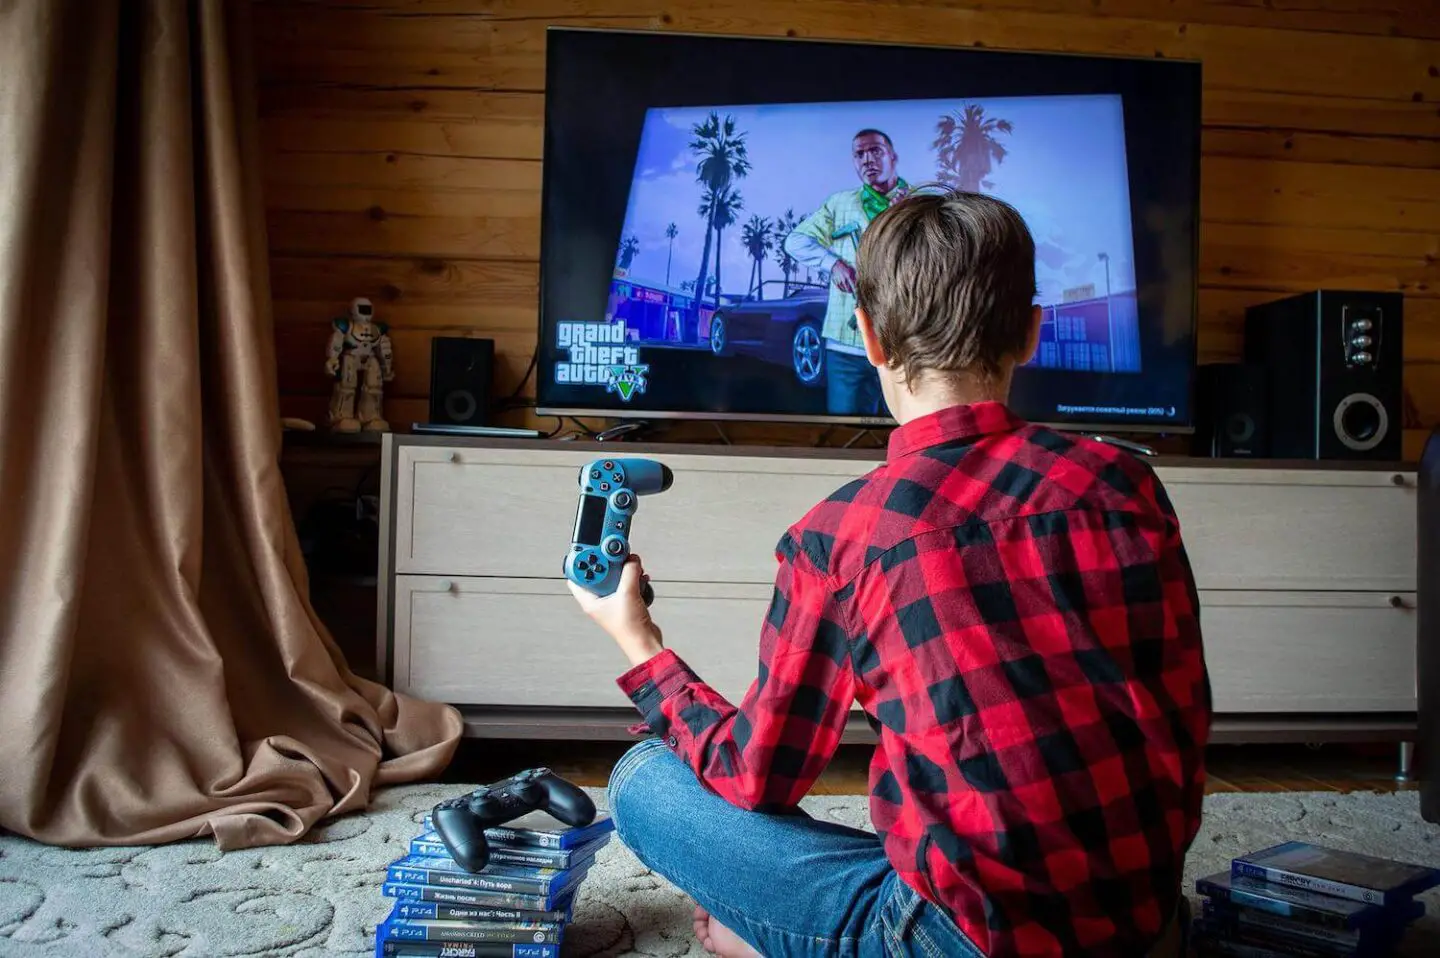 A teenage boy in a red and black checked shirt sits on the floor in front of a TV. He has holding a playstation controller and has a stack of playstation games next to him